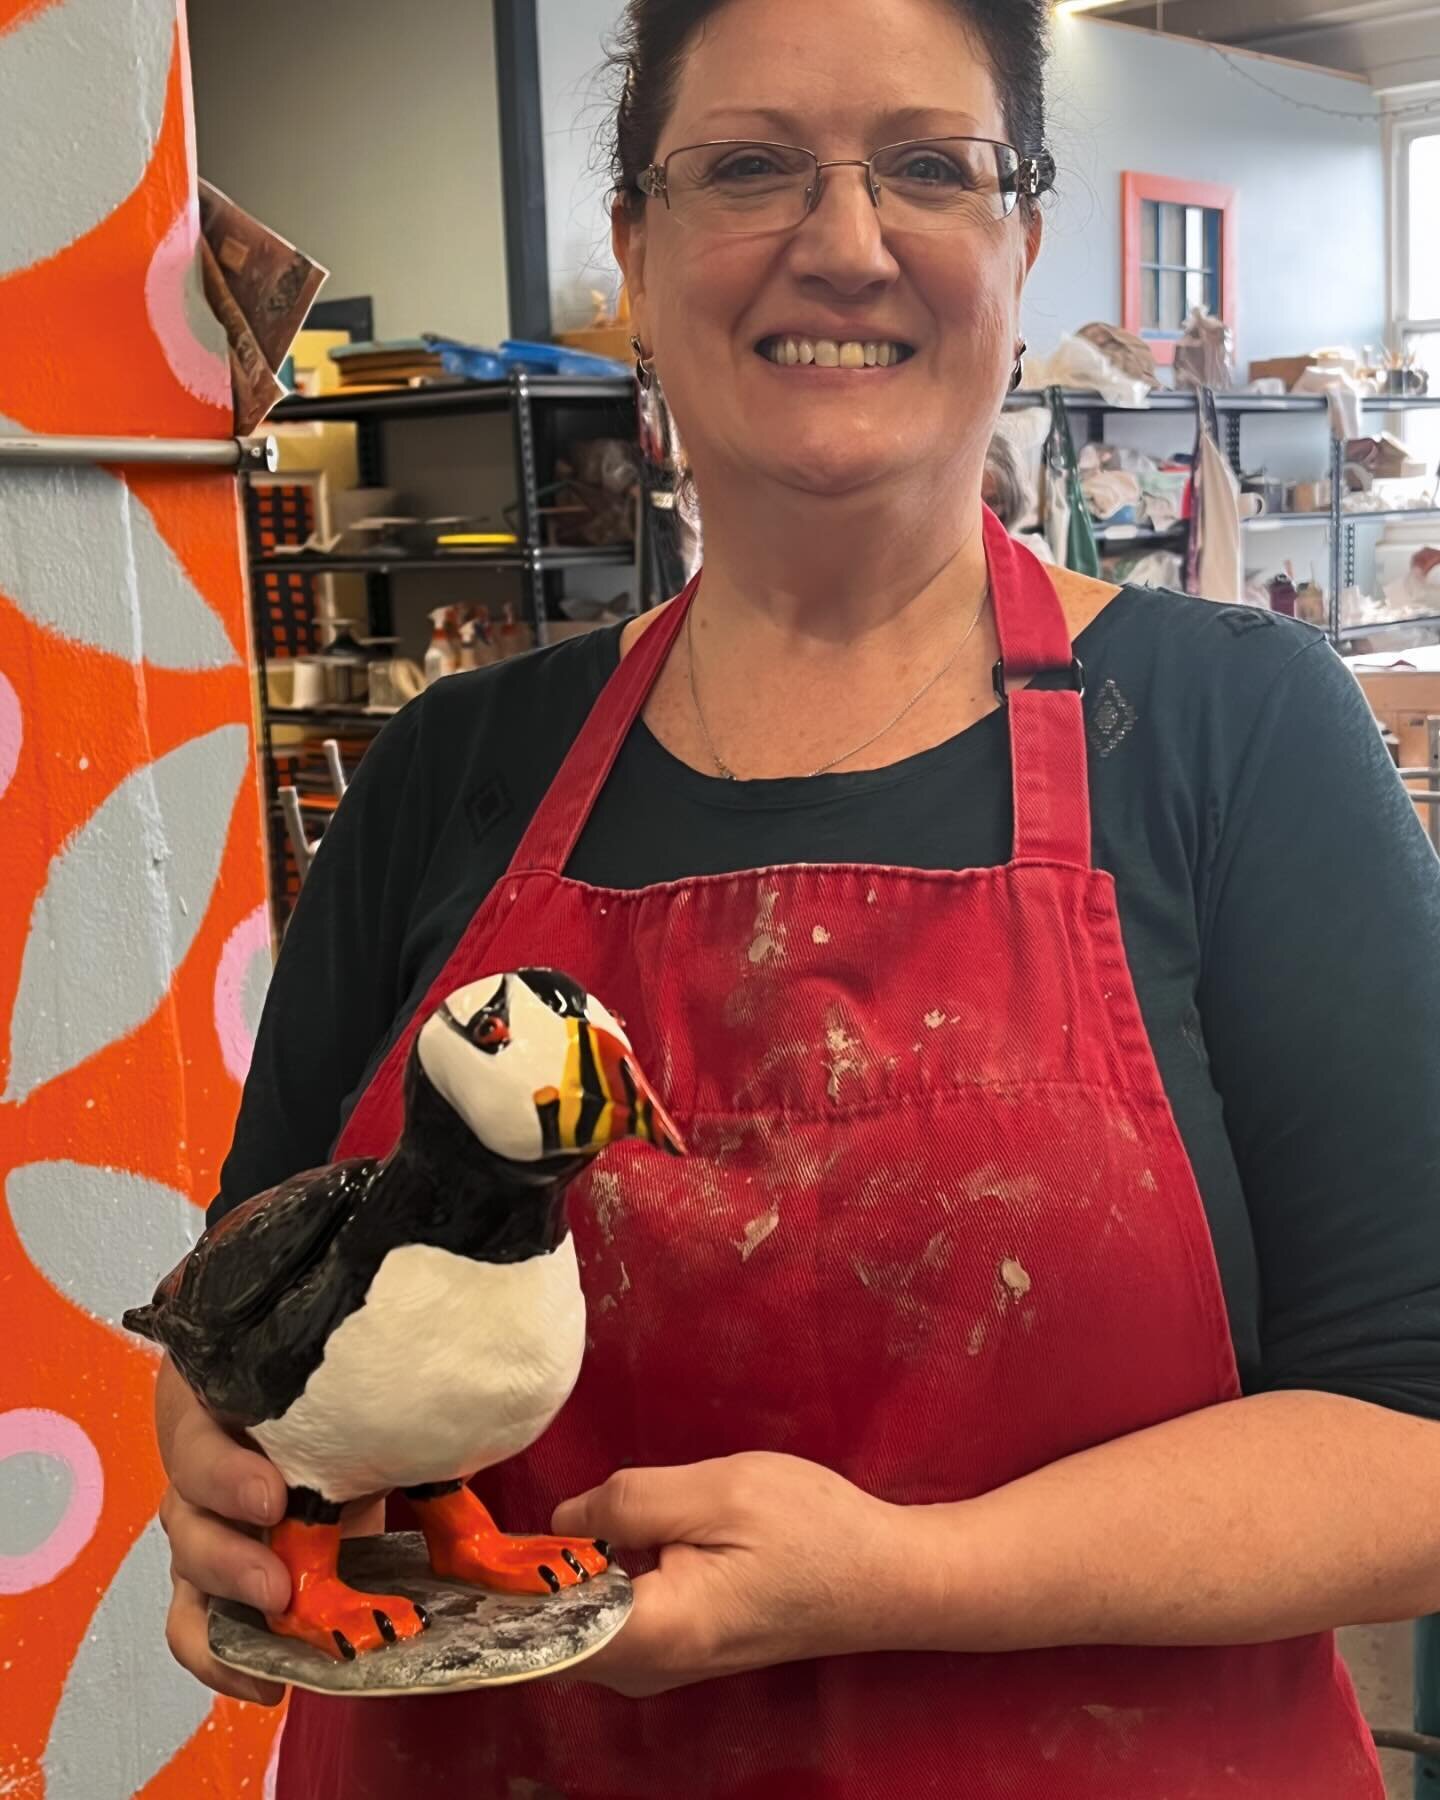 Proud Puffin Mamma Rhonda ❤️❤️❤️ 

@theclayschool @leewarepottery 

#puffin #puffinsofinstagram #puffinworld #clayclass #clayclasses #adultpotteryclasses #theclayschool #lynnma